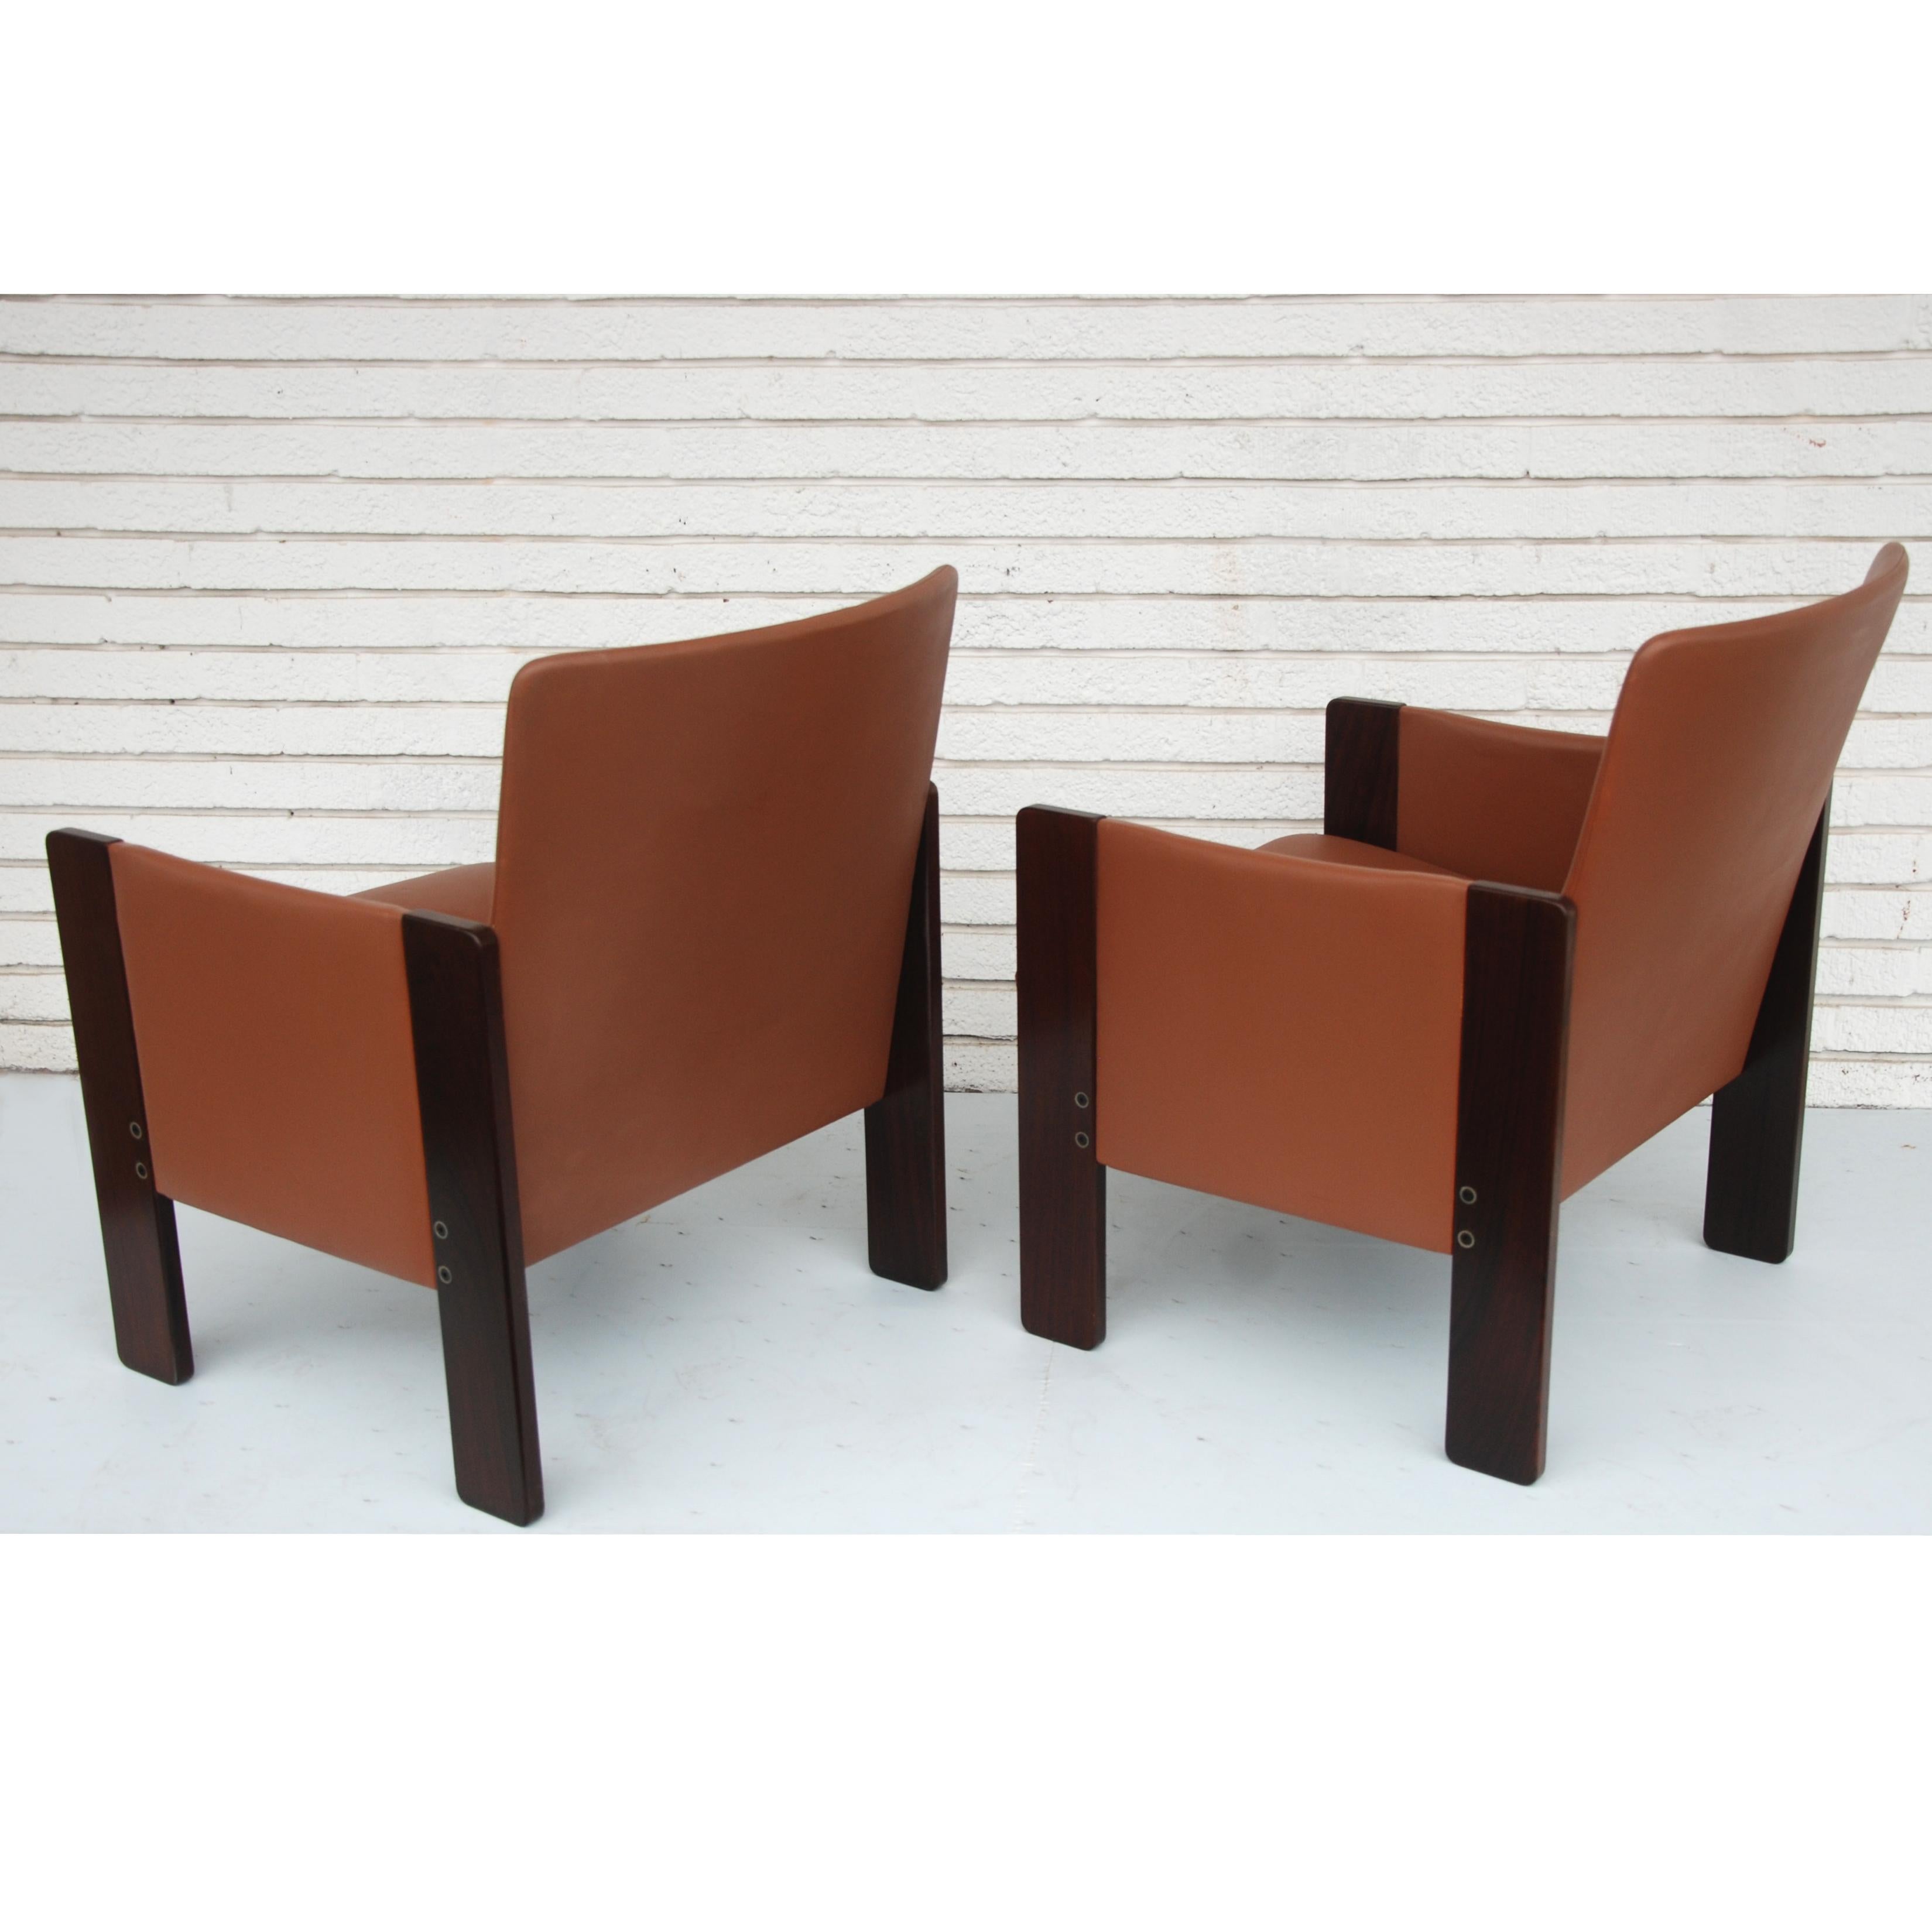 Italian Tobia Scarpa for Cassina Rosewood and Leather Lounge Chairs